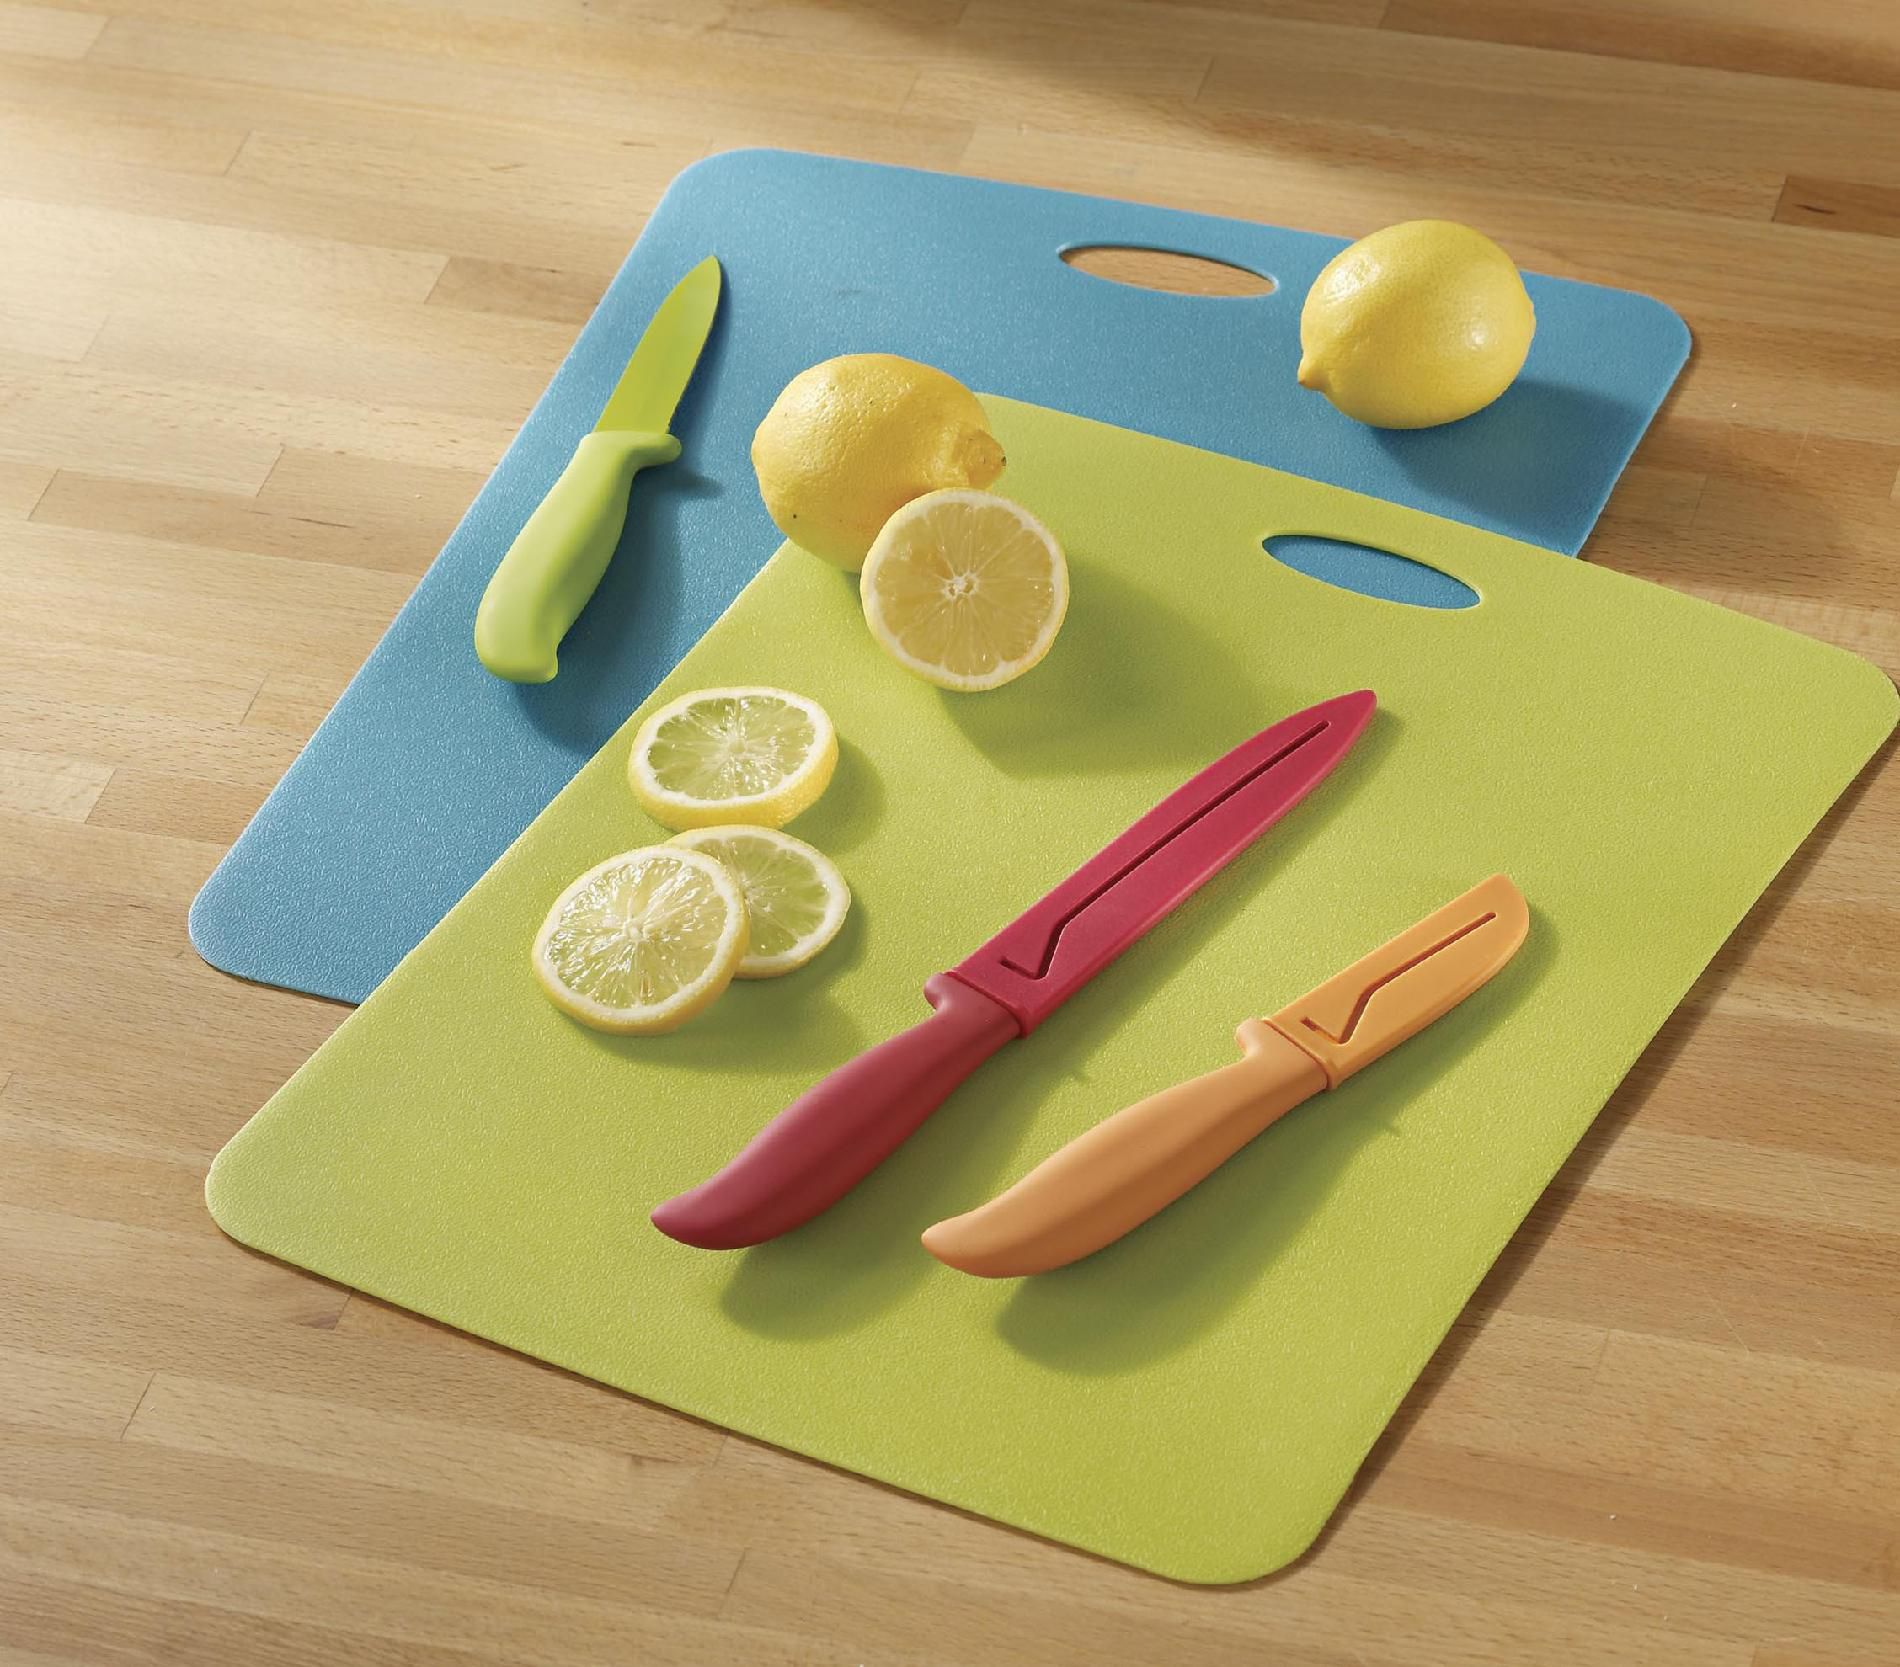 Farberware 8pc Colored Knife and Mat set